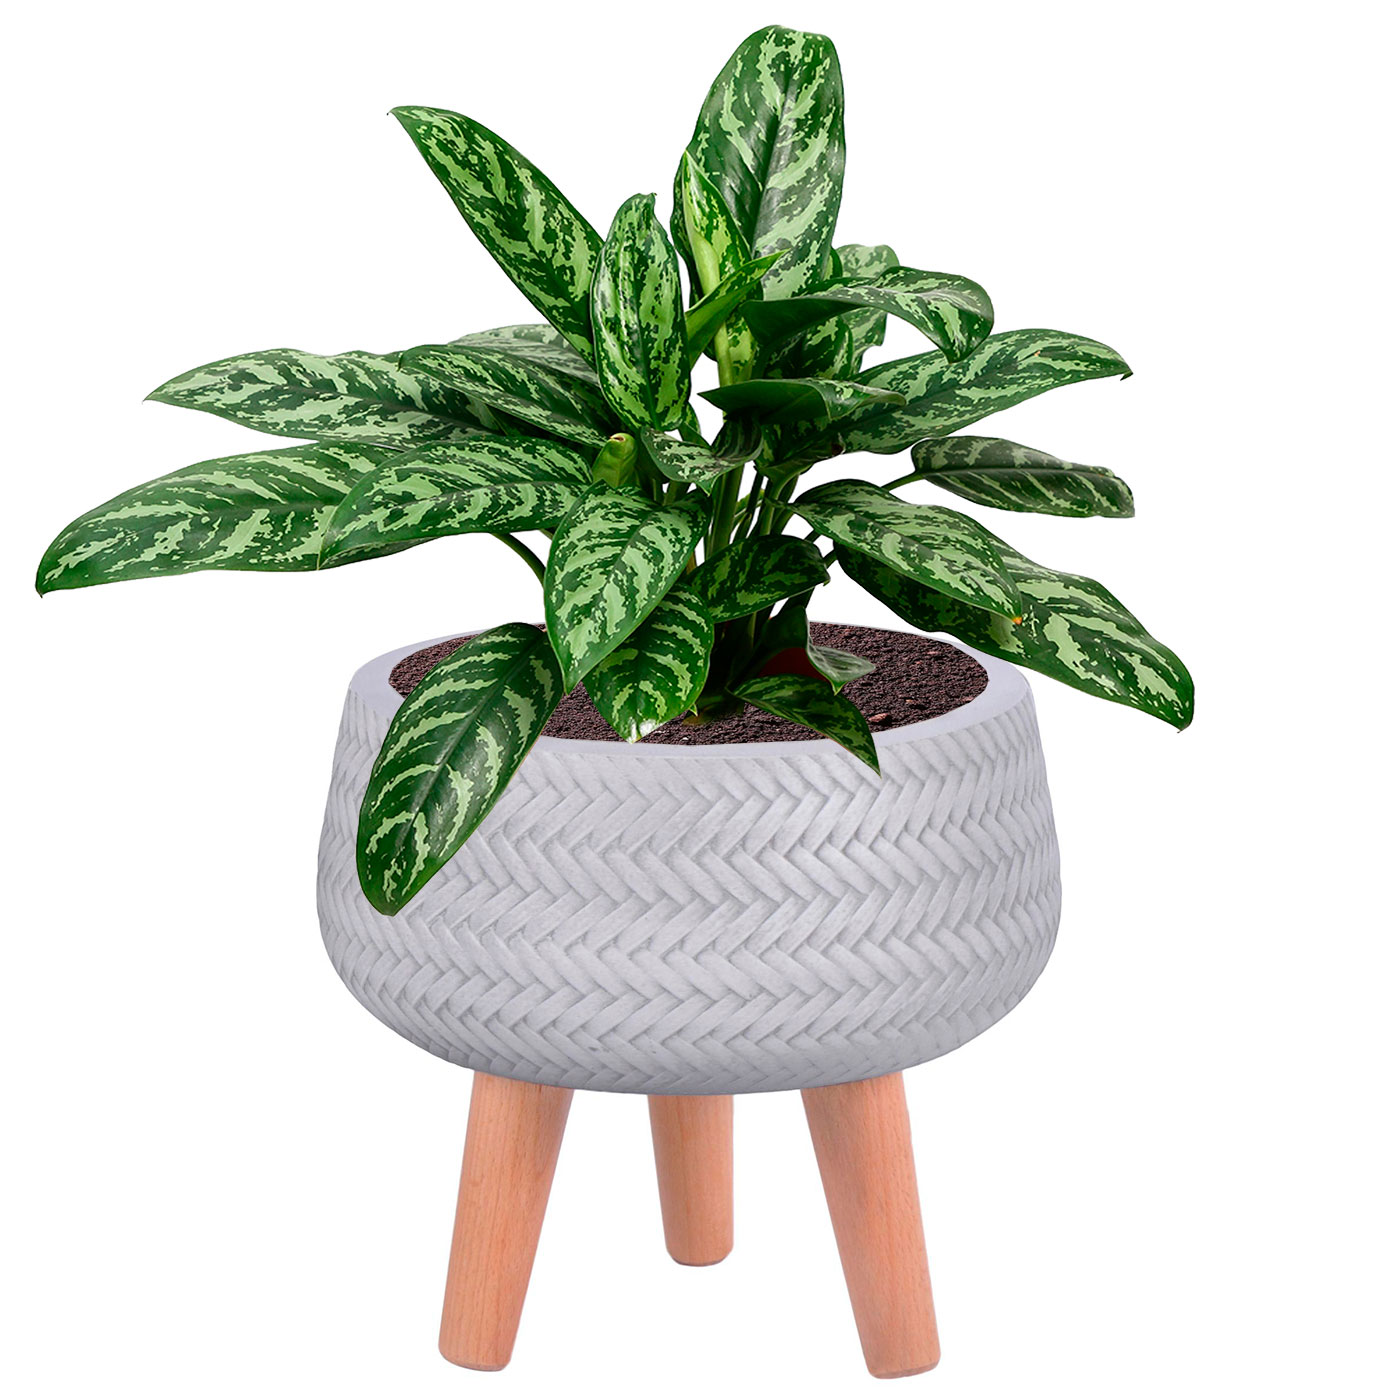 Plaited Style White Bowl Indoor Planter with Legs D32 H26.5 cm, 10.2 ltrs Cap.